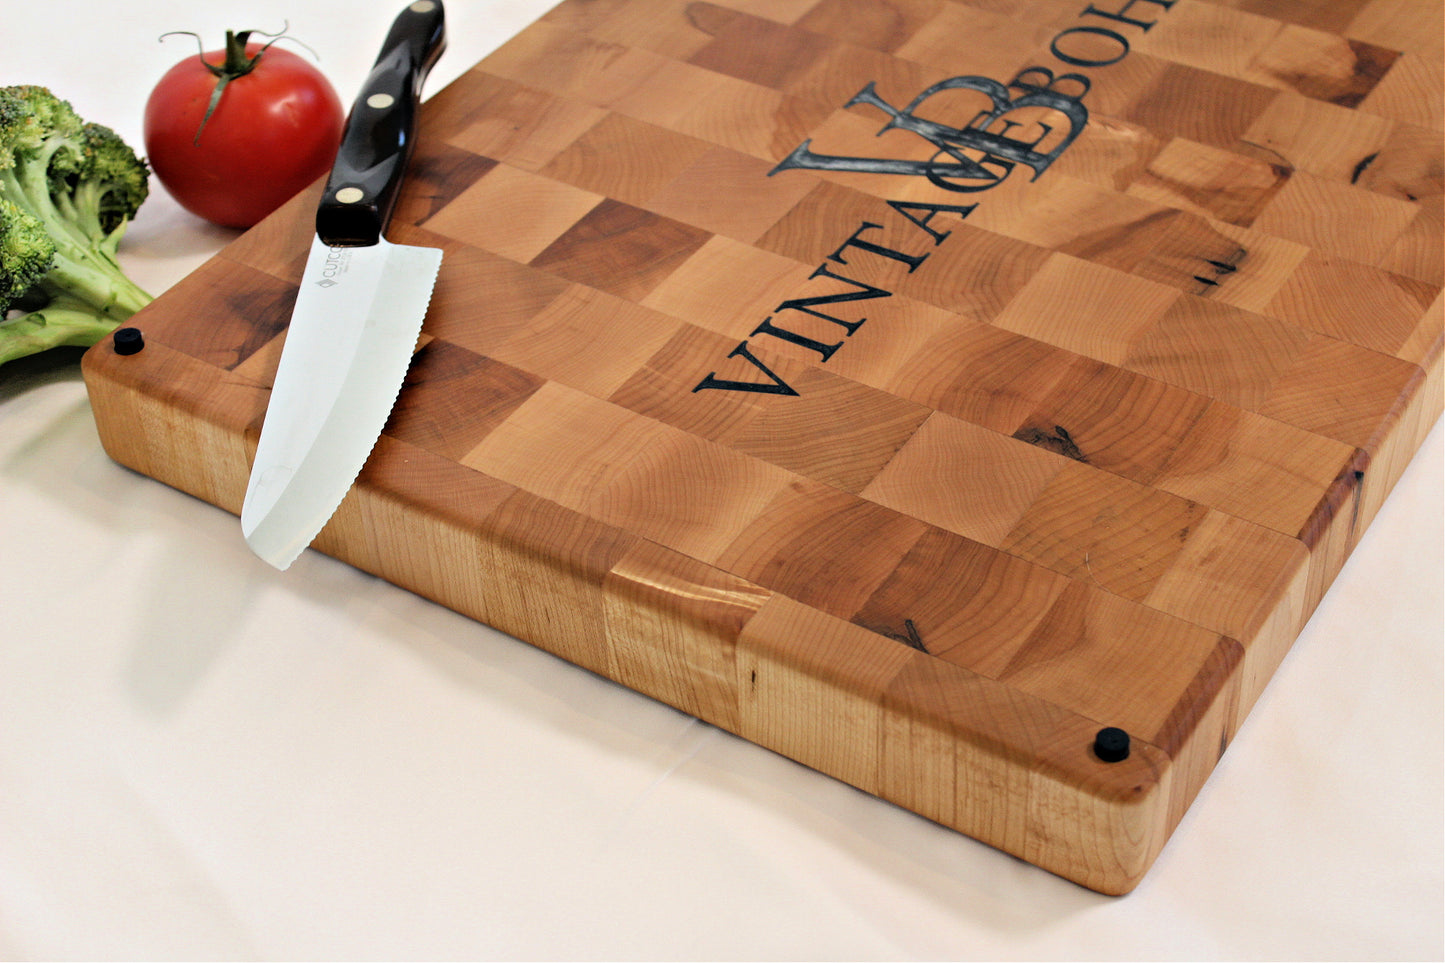 LARGE SIZE "Personalized" End-Grain Cutting Board w/ Your Name, Logo or Initial